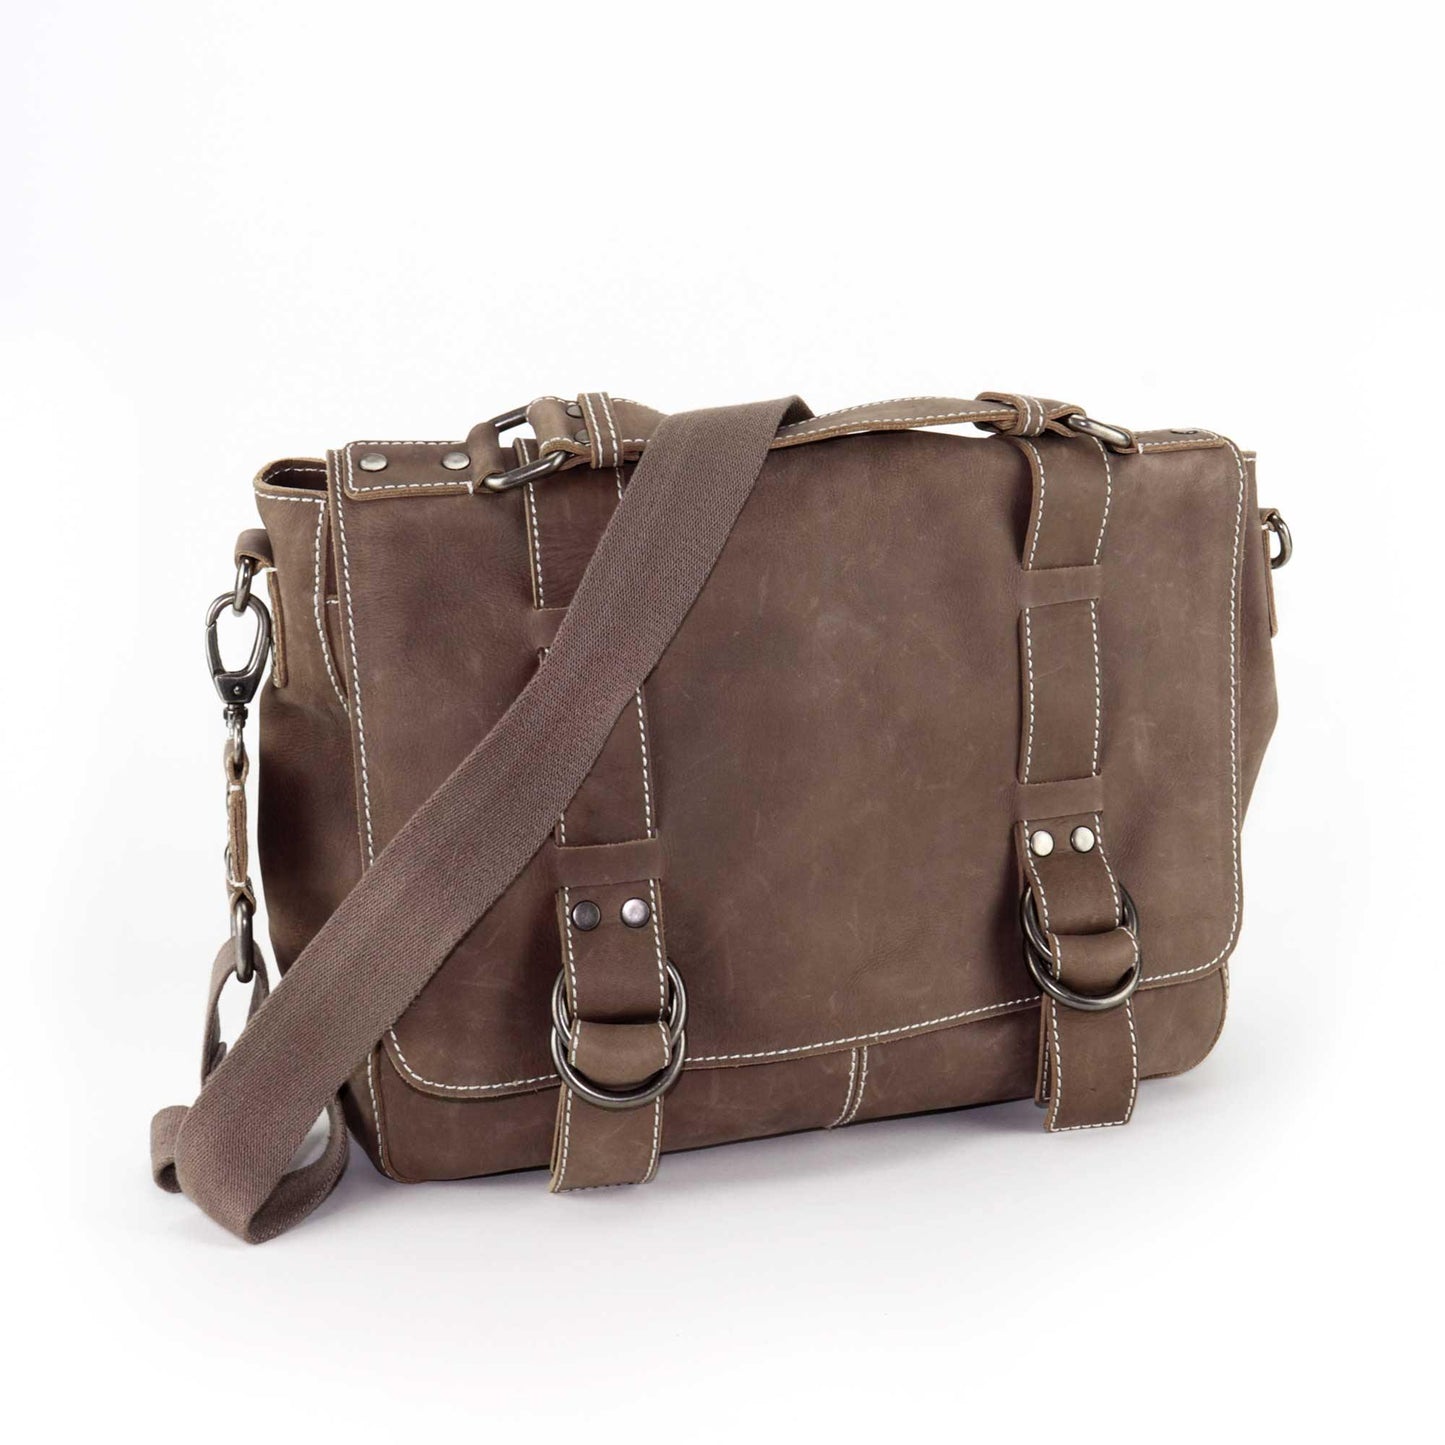 SOUTH HOUS EXCLUSIVE Bernardo Nubuck Leather Messenger crossbody satchel with fold over flap, double ring, and rivet deliver the news while stashing the booze